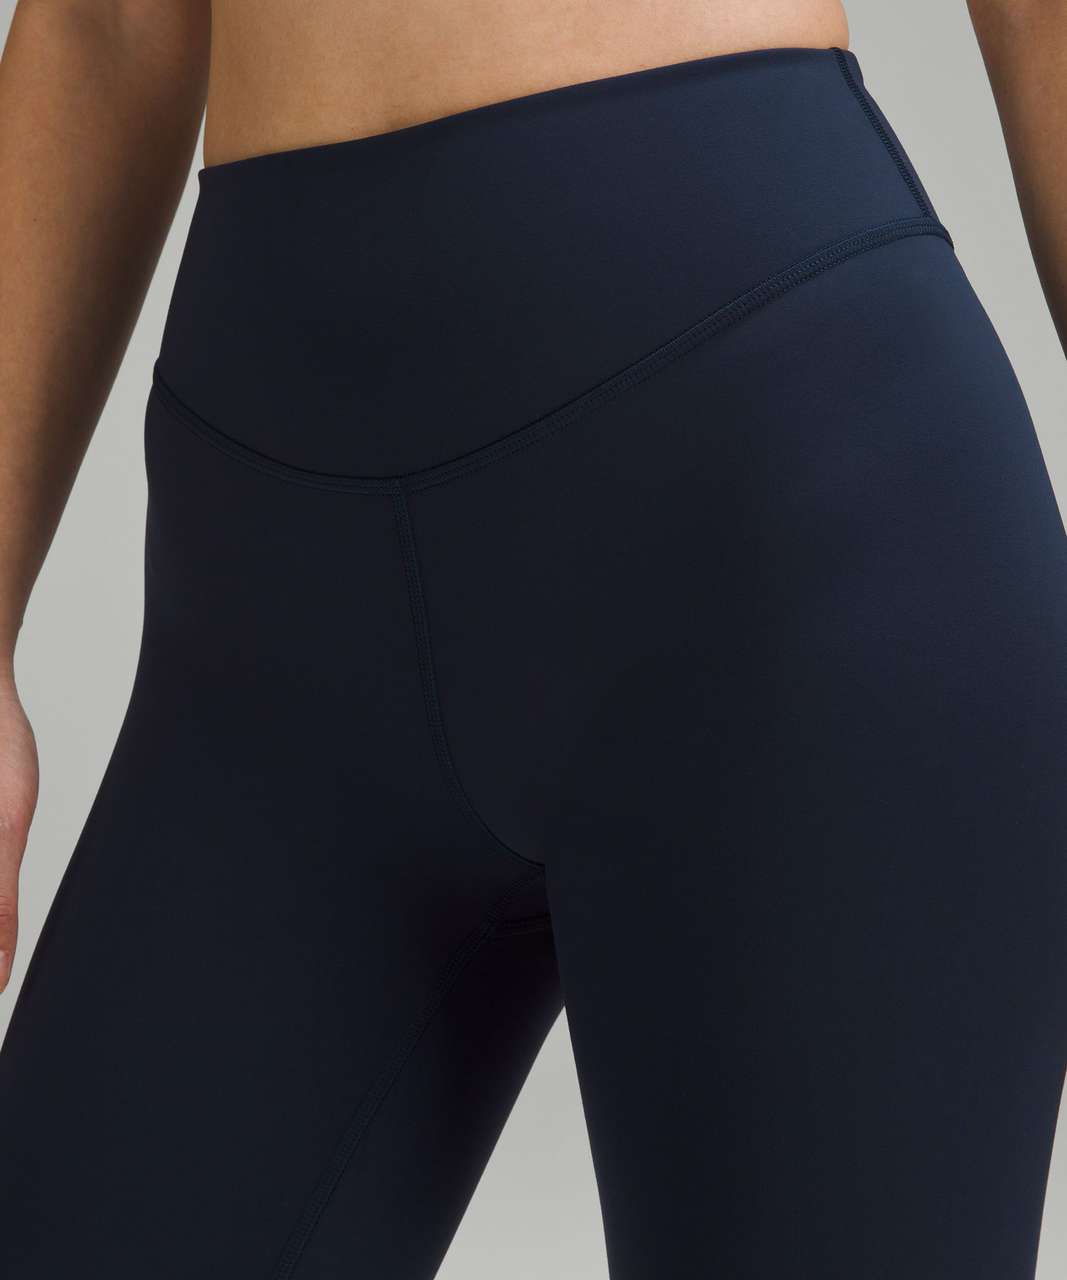 Lululemon Wunder Under SmoothCover High-Rise Tight 25" - True Navy